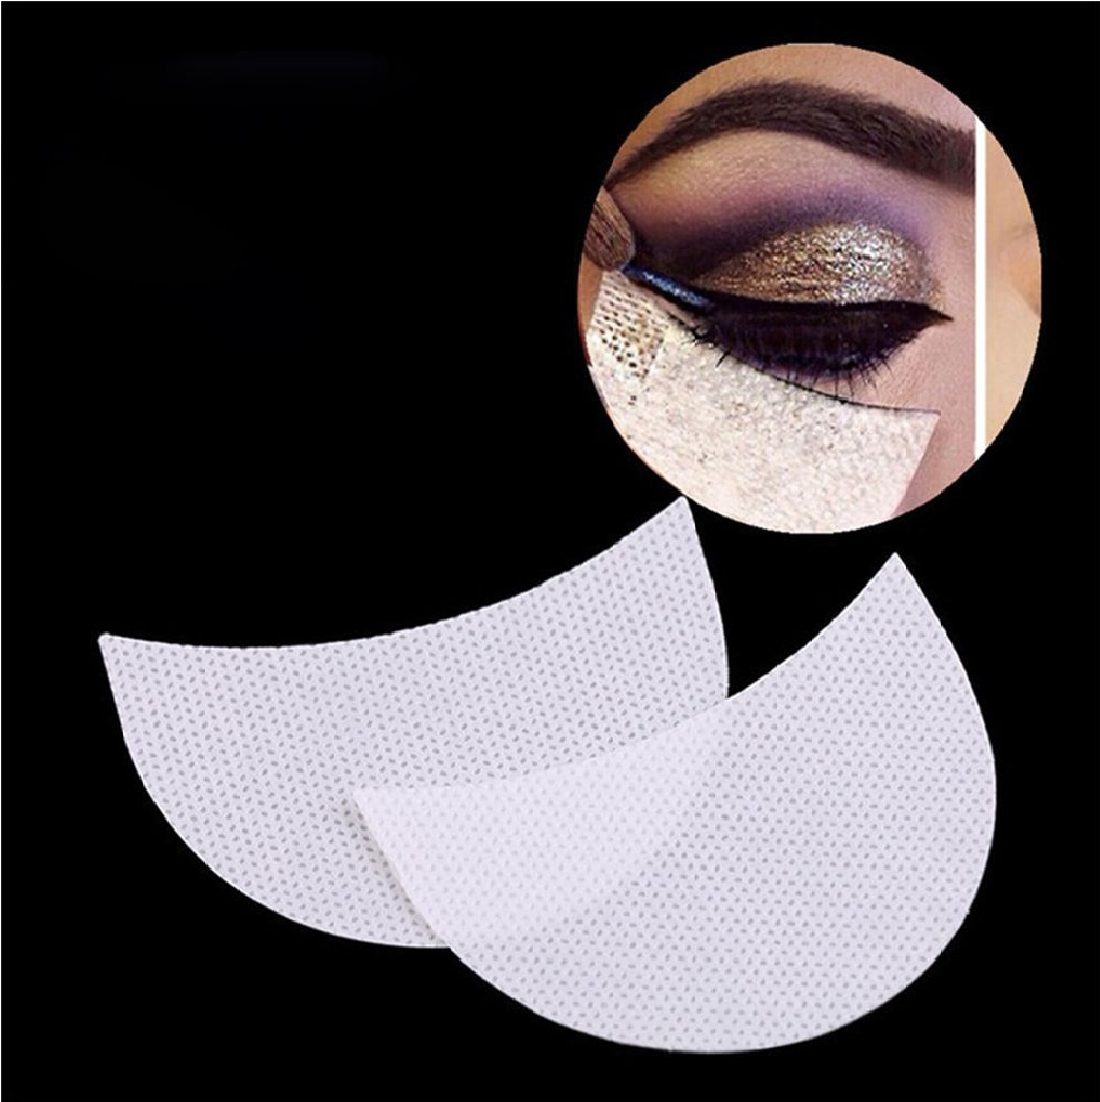 Eyeshadow Shields Under Eye Patches Disposable, Prevent Eyelash Extensions Pads and Eye Tips Sticker Wraps Make Up Tools (20 Pcs)